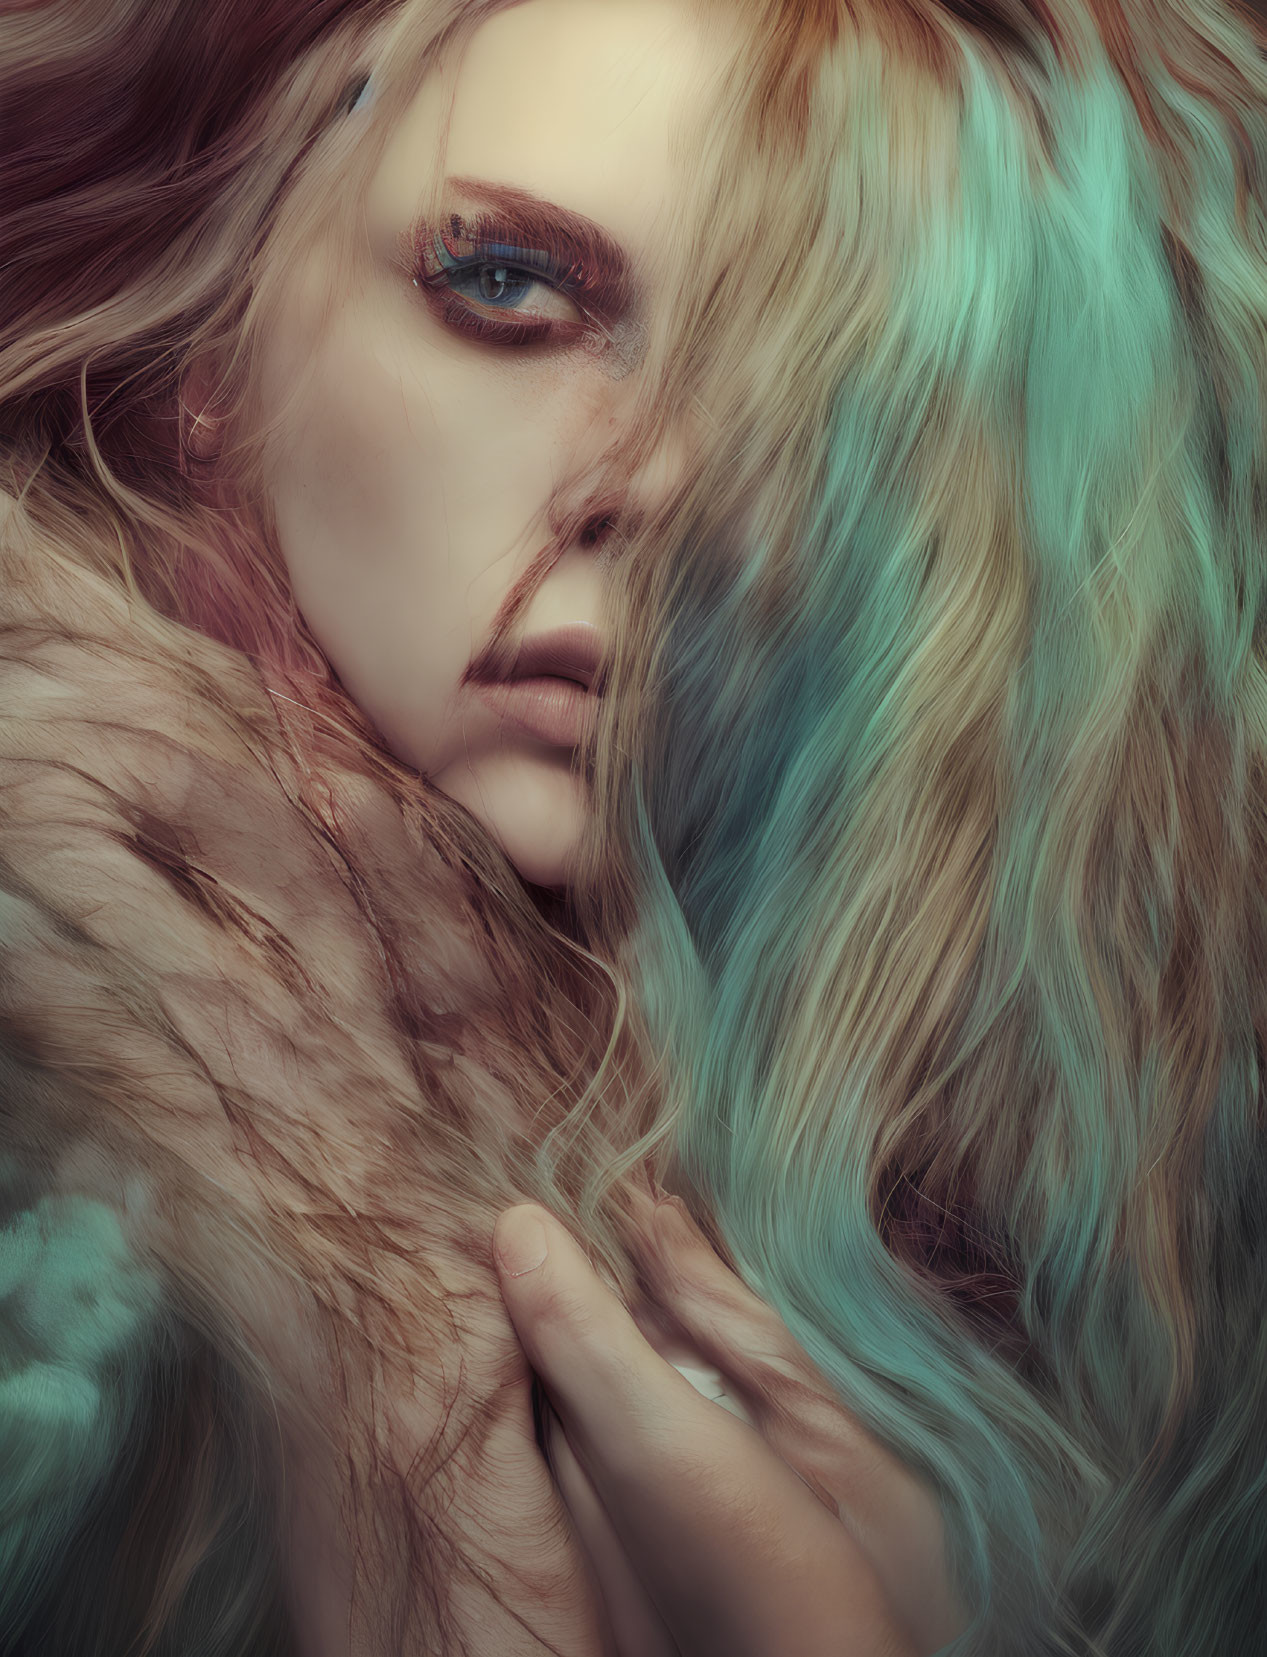 Close-Up Portrait Featuring Striking Blue Eye Makeup and Blonde to Cyan Ombre Hair